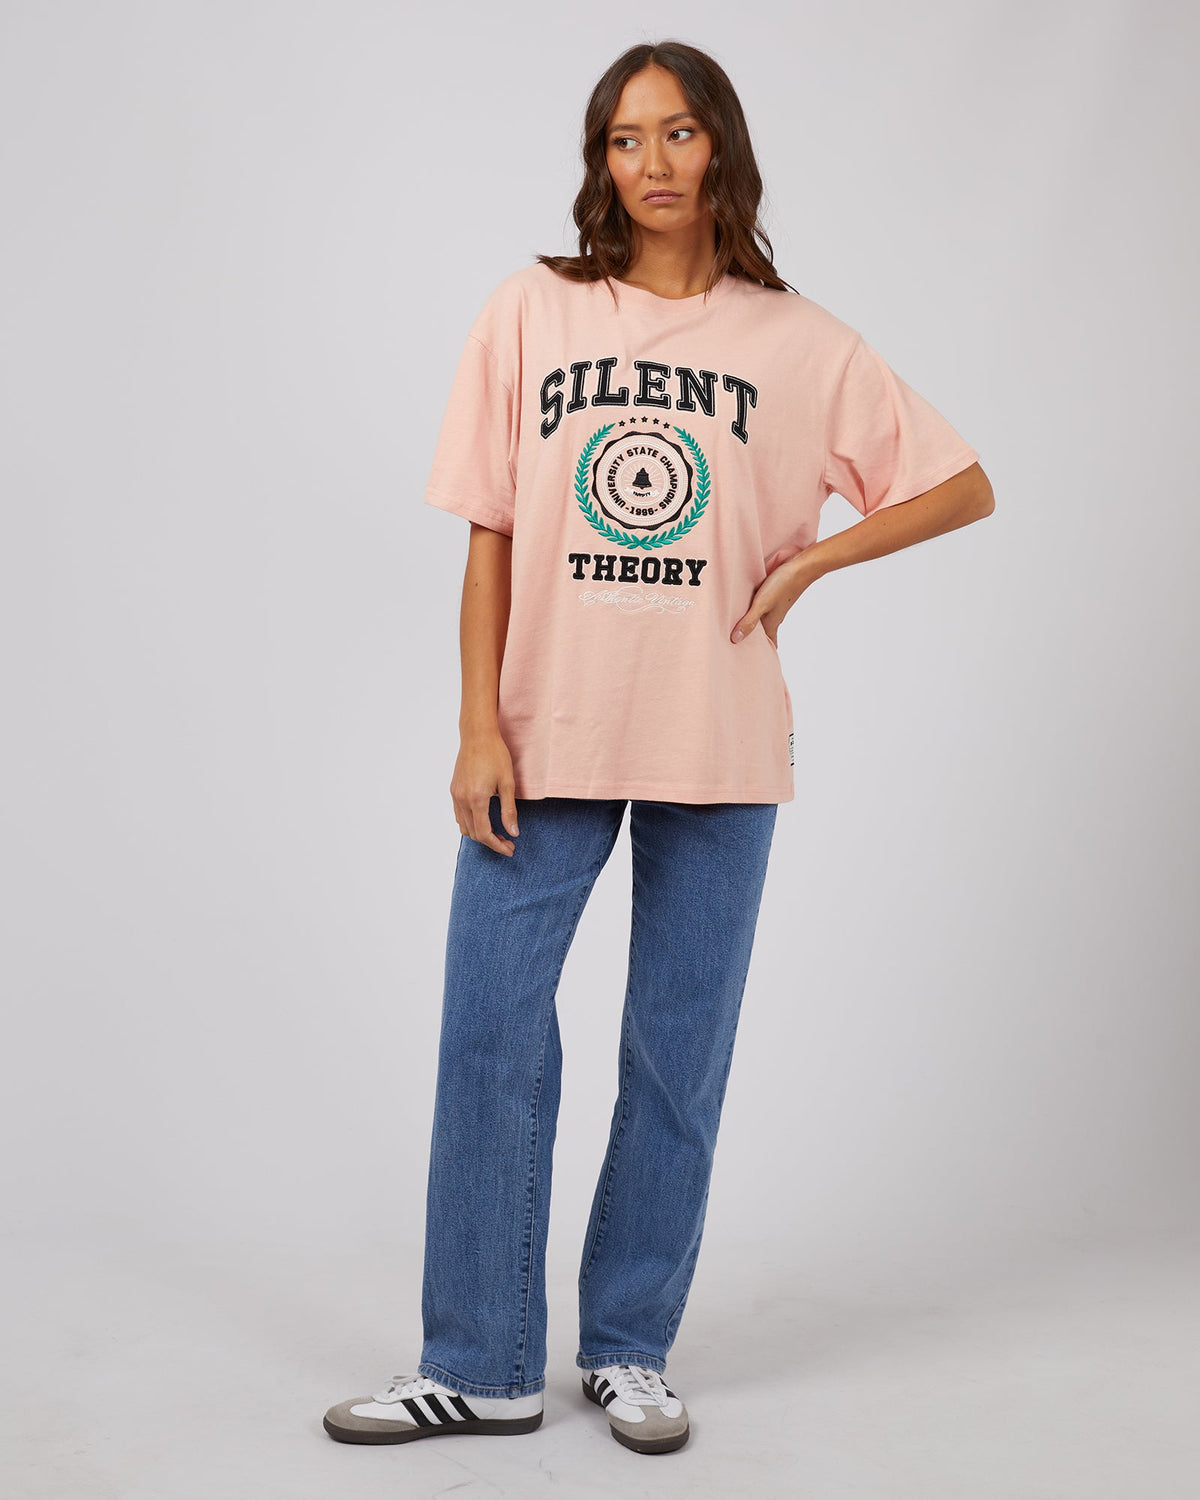 Silent Theory Ladies-A Team Tee Pale Pink-Edge Clothing